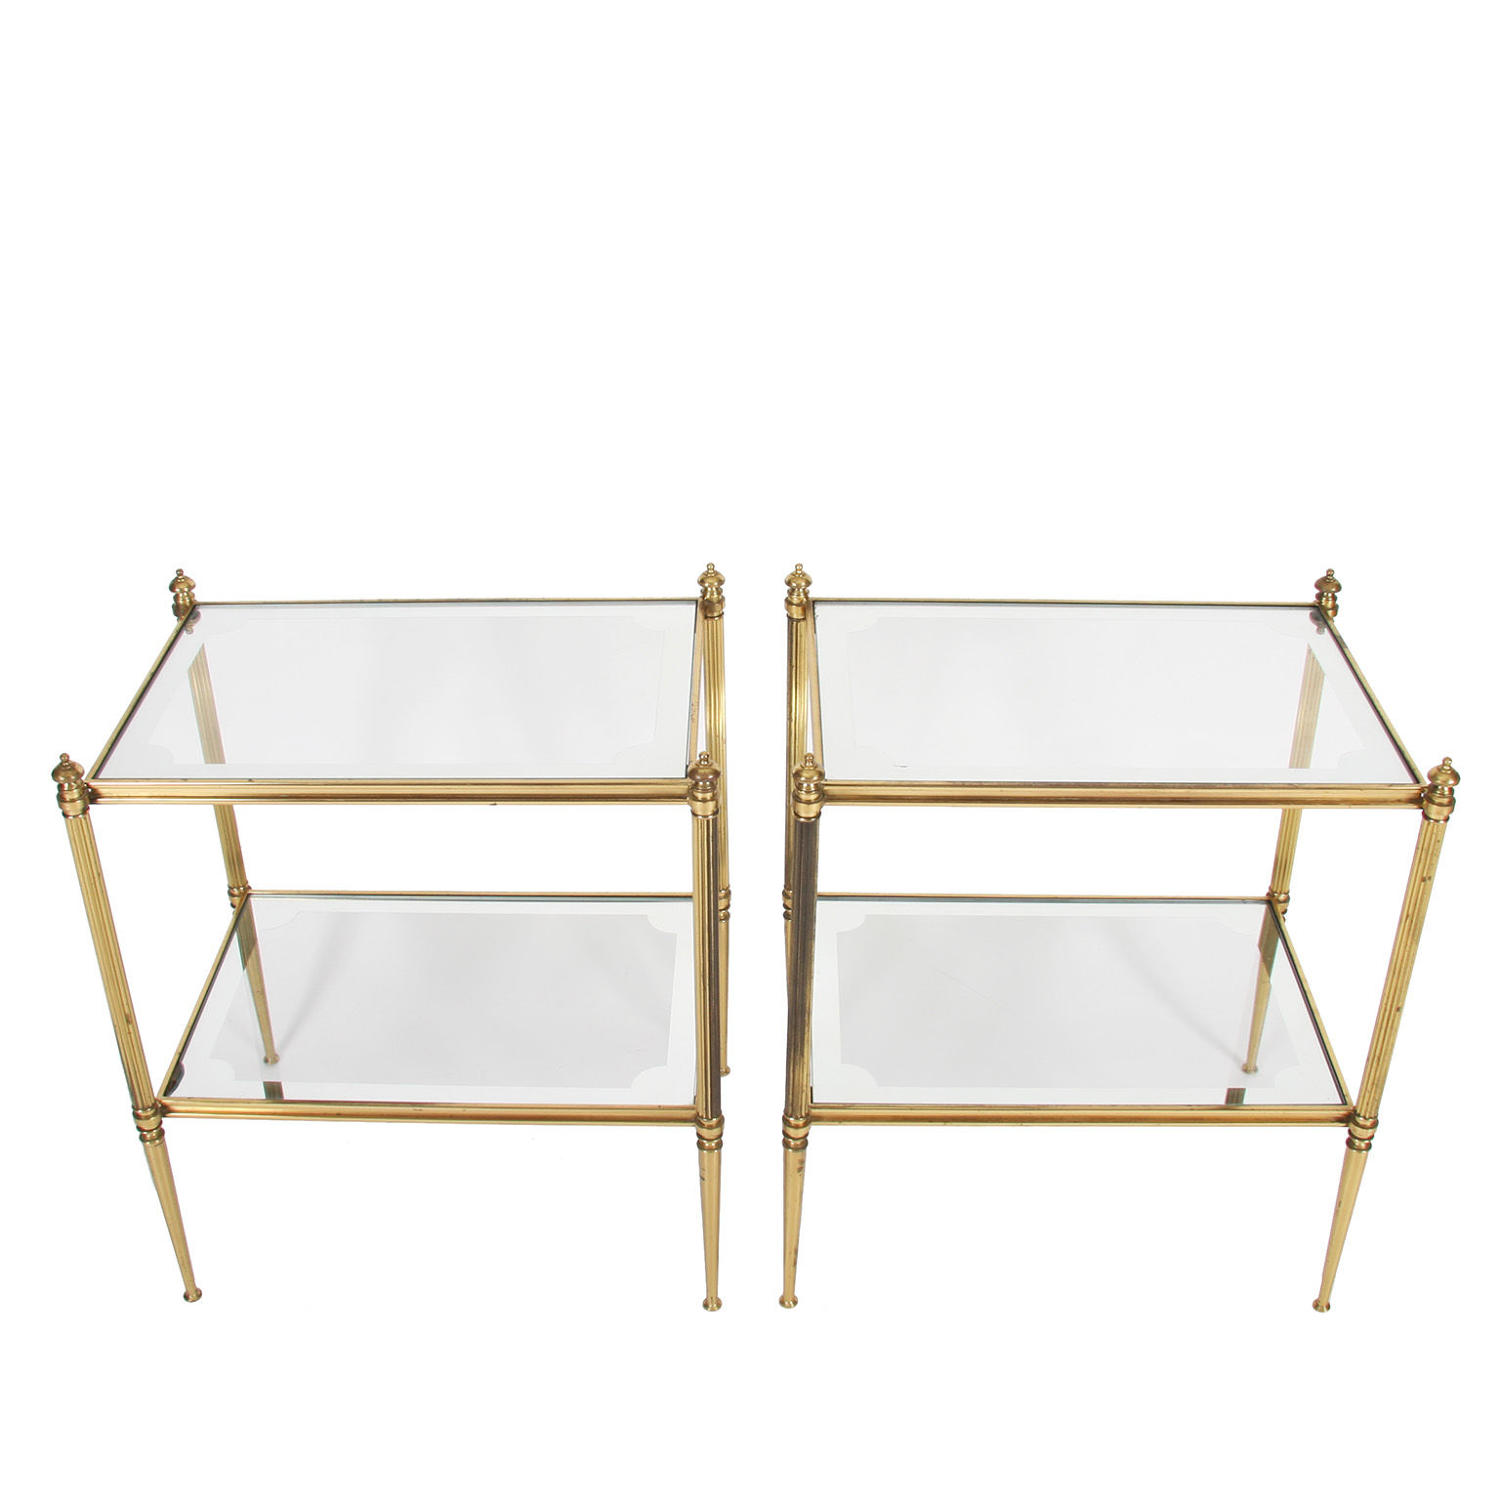 Pair of Two Tier Brass & Glass Side Tables with Mirrored Borders